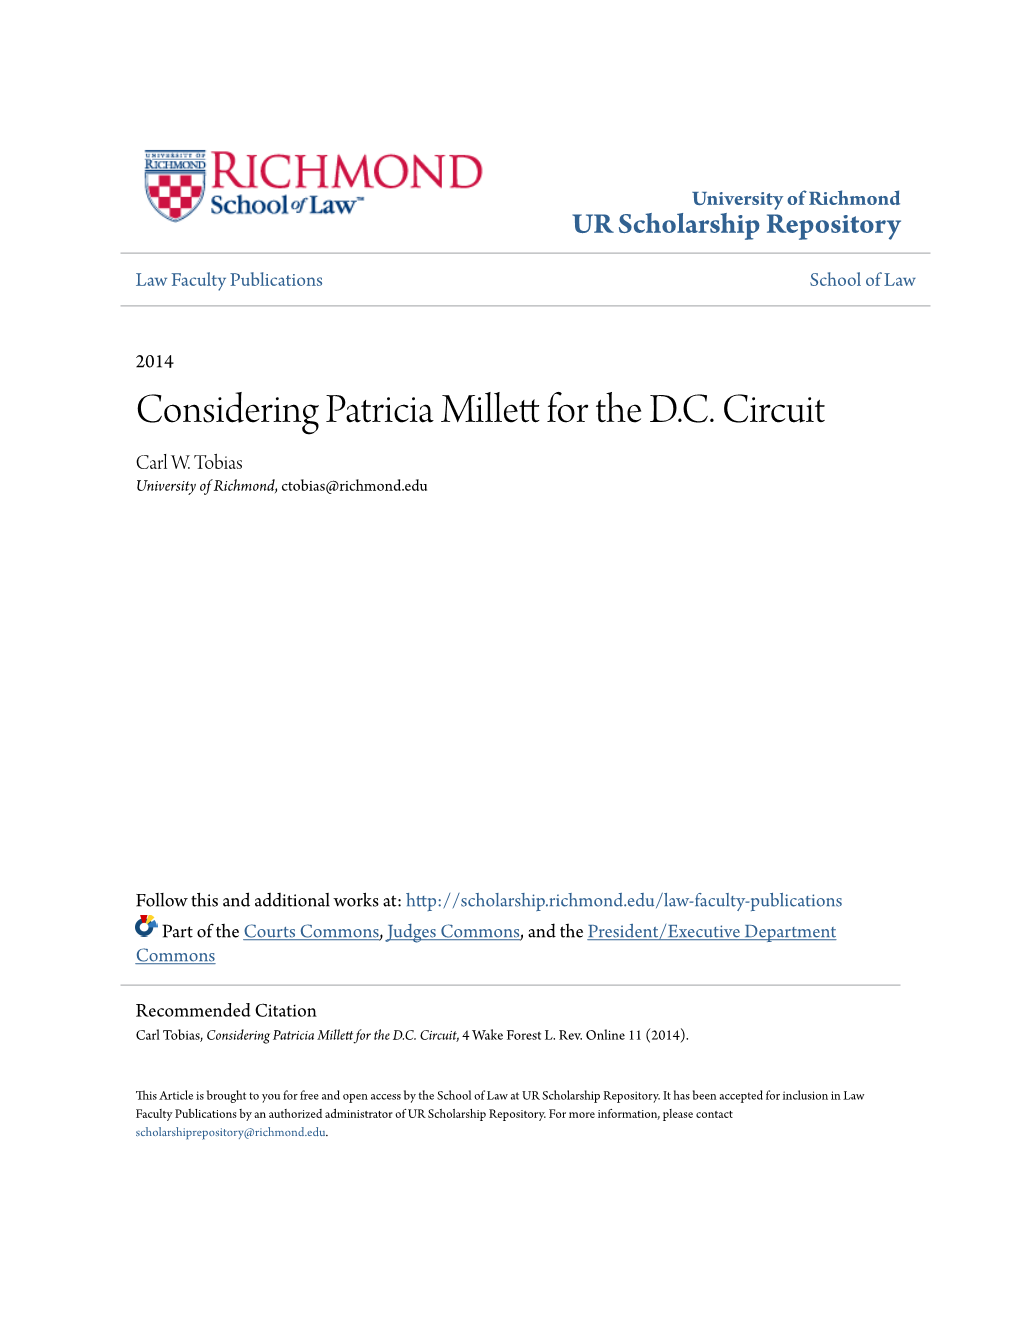 Considering Patricia Millett for the D.C. Circuit